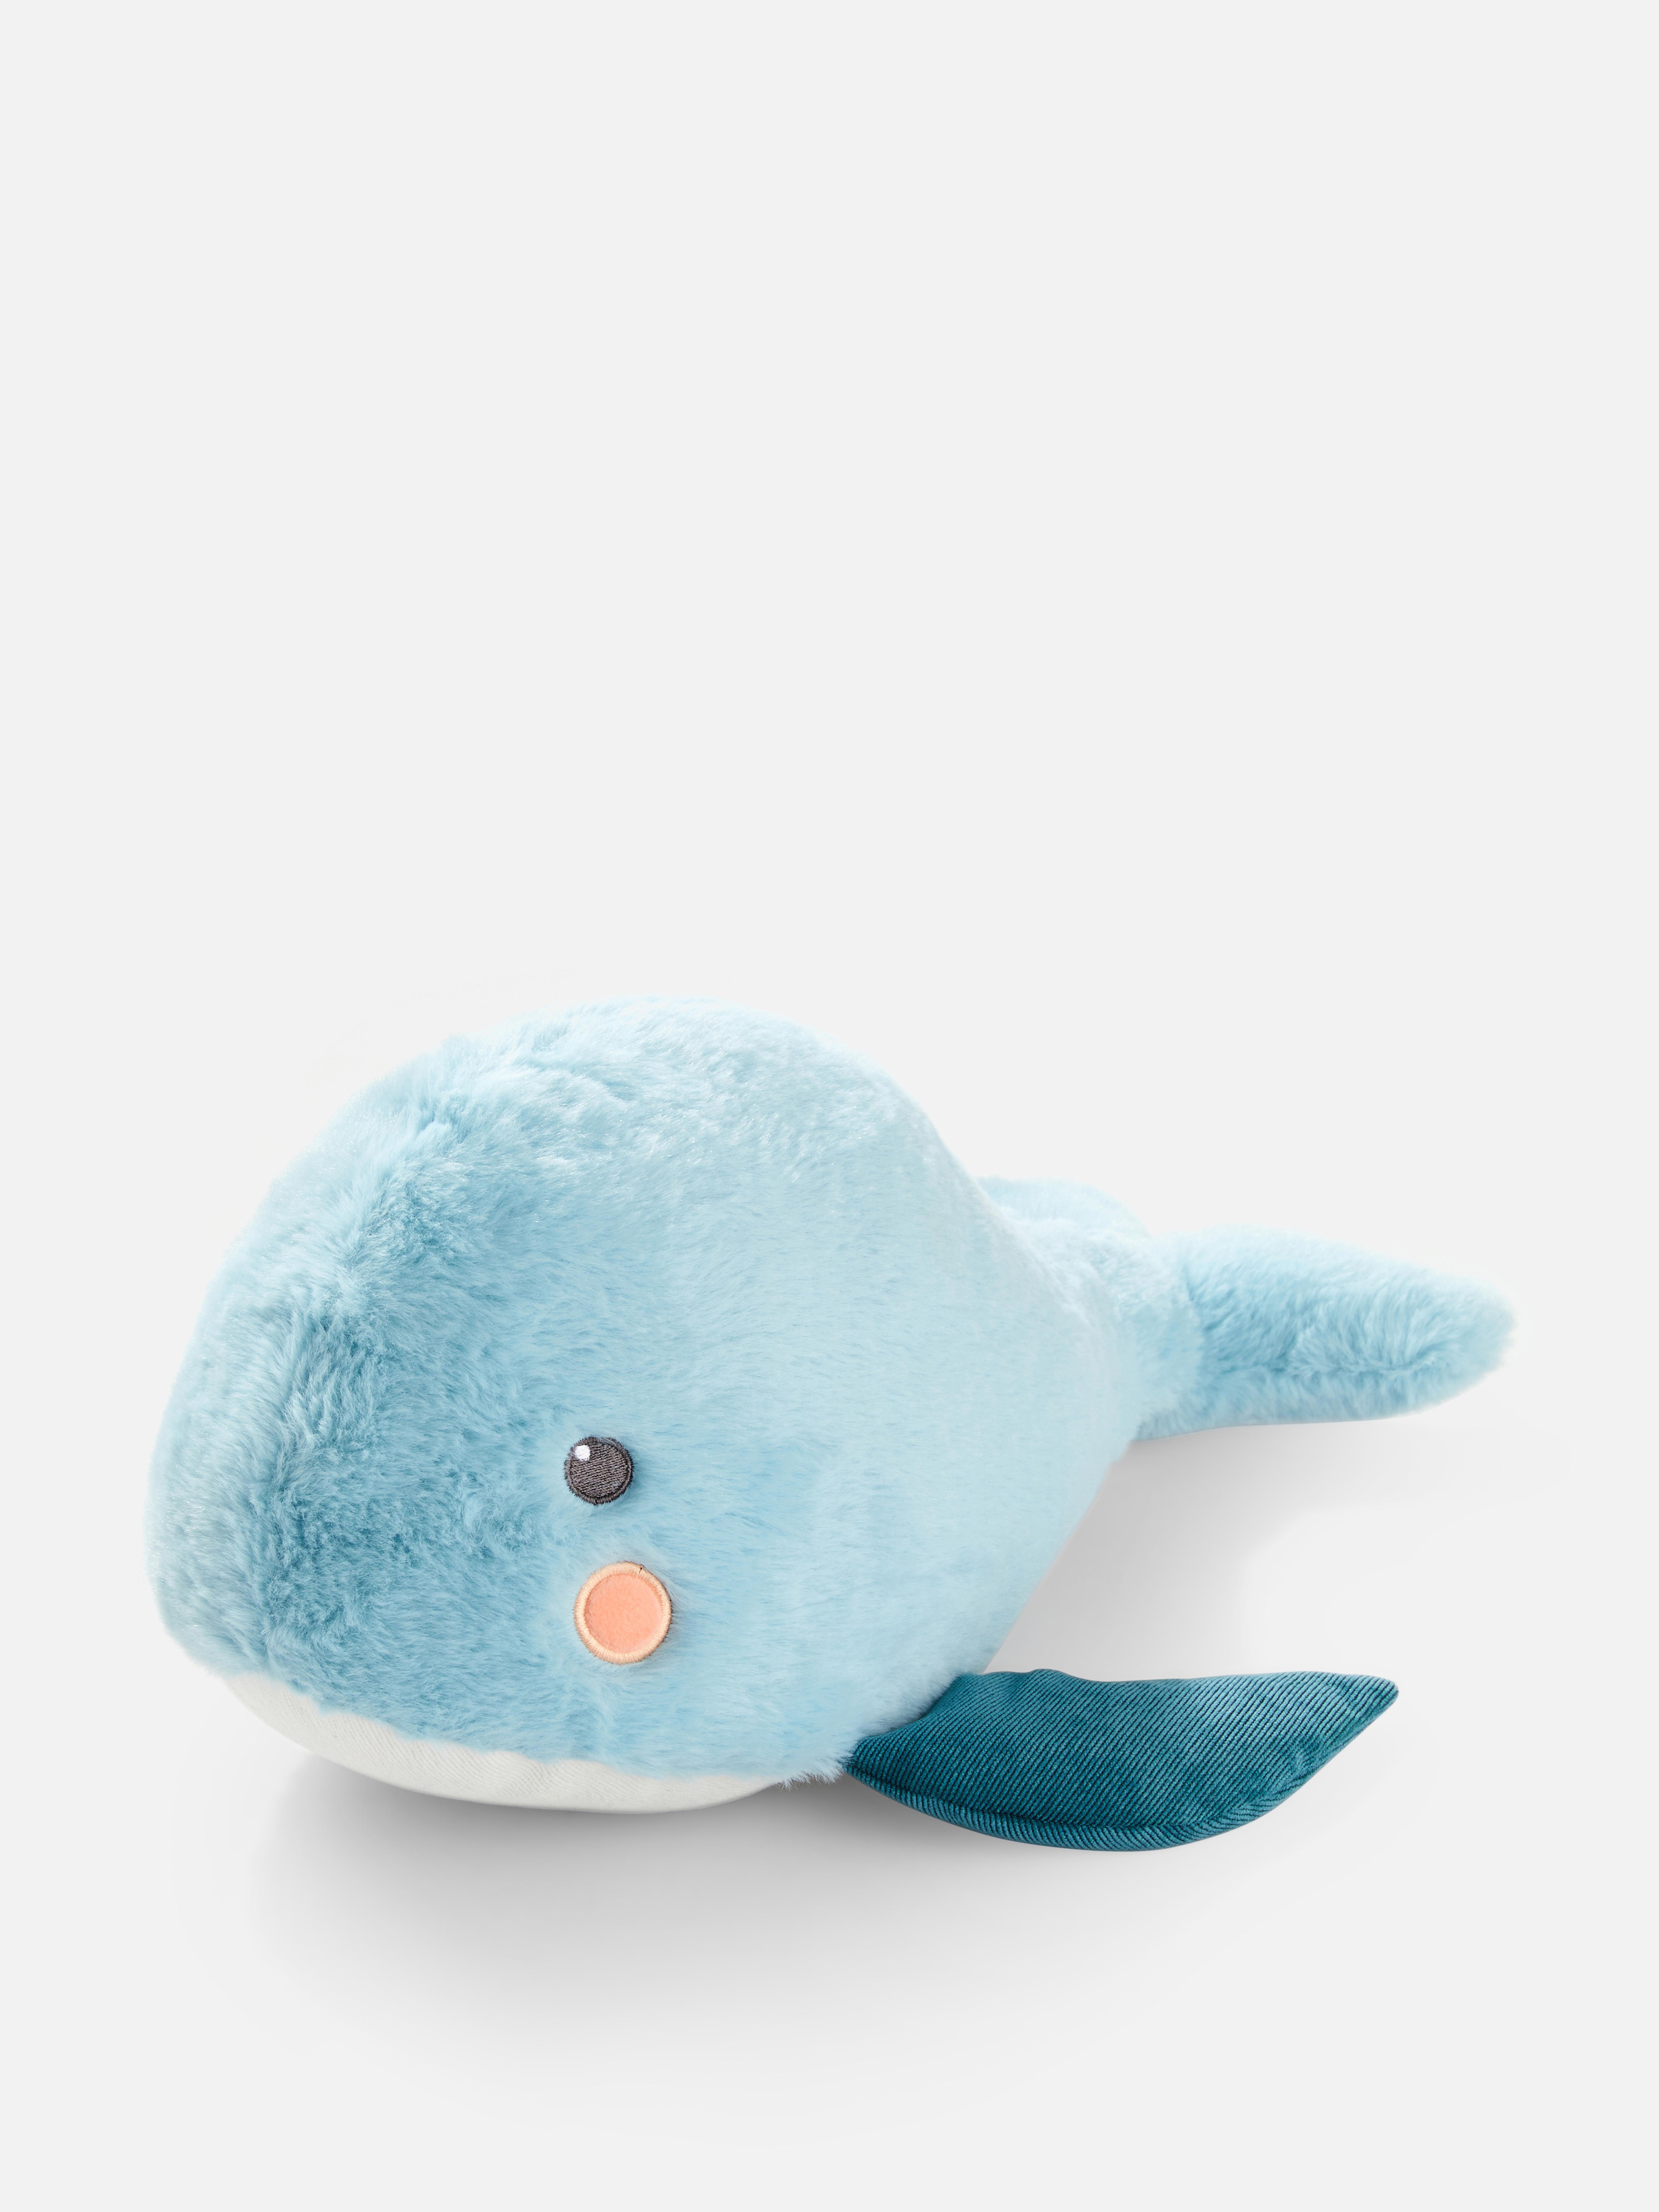 Large Whale Plush Toy